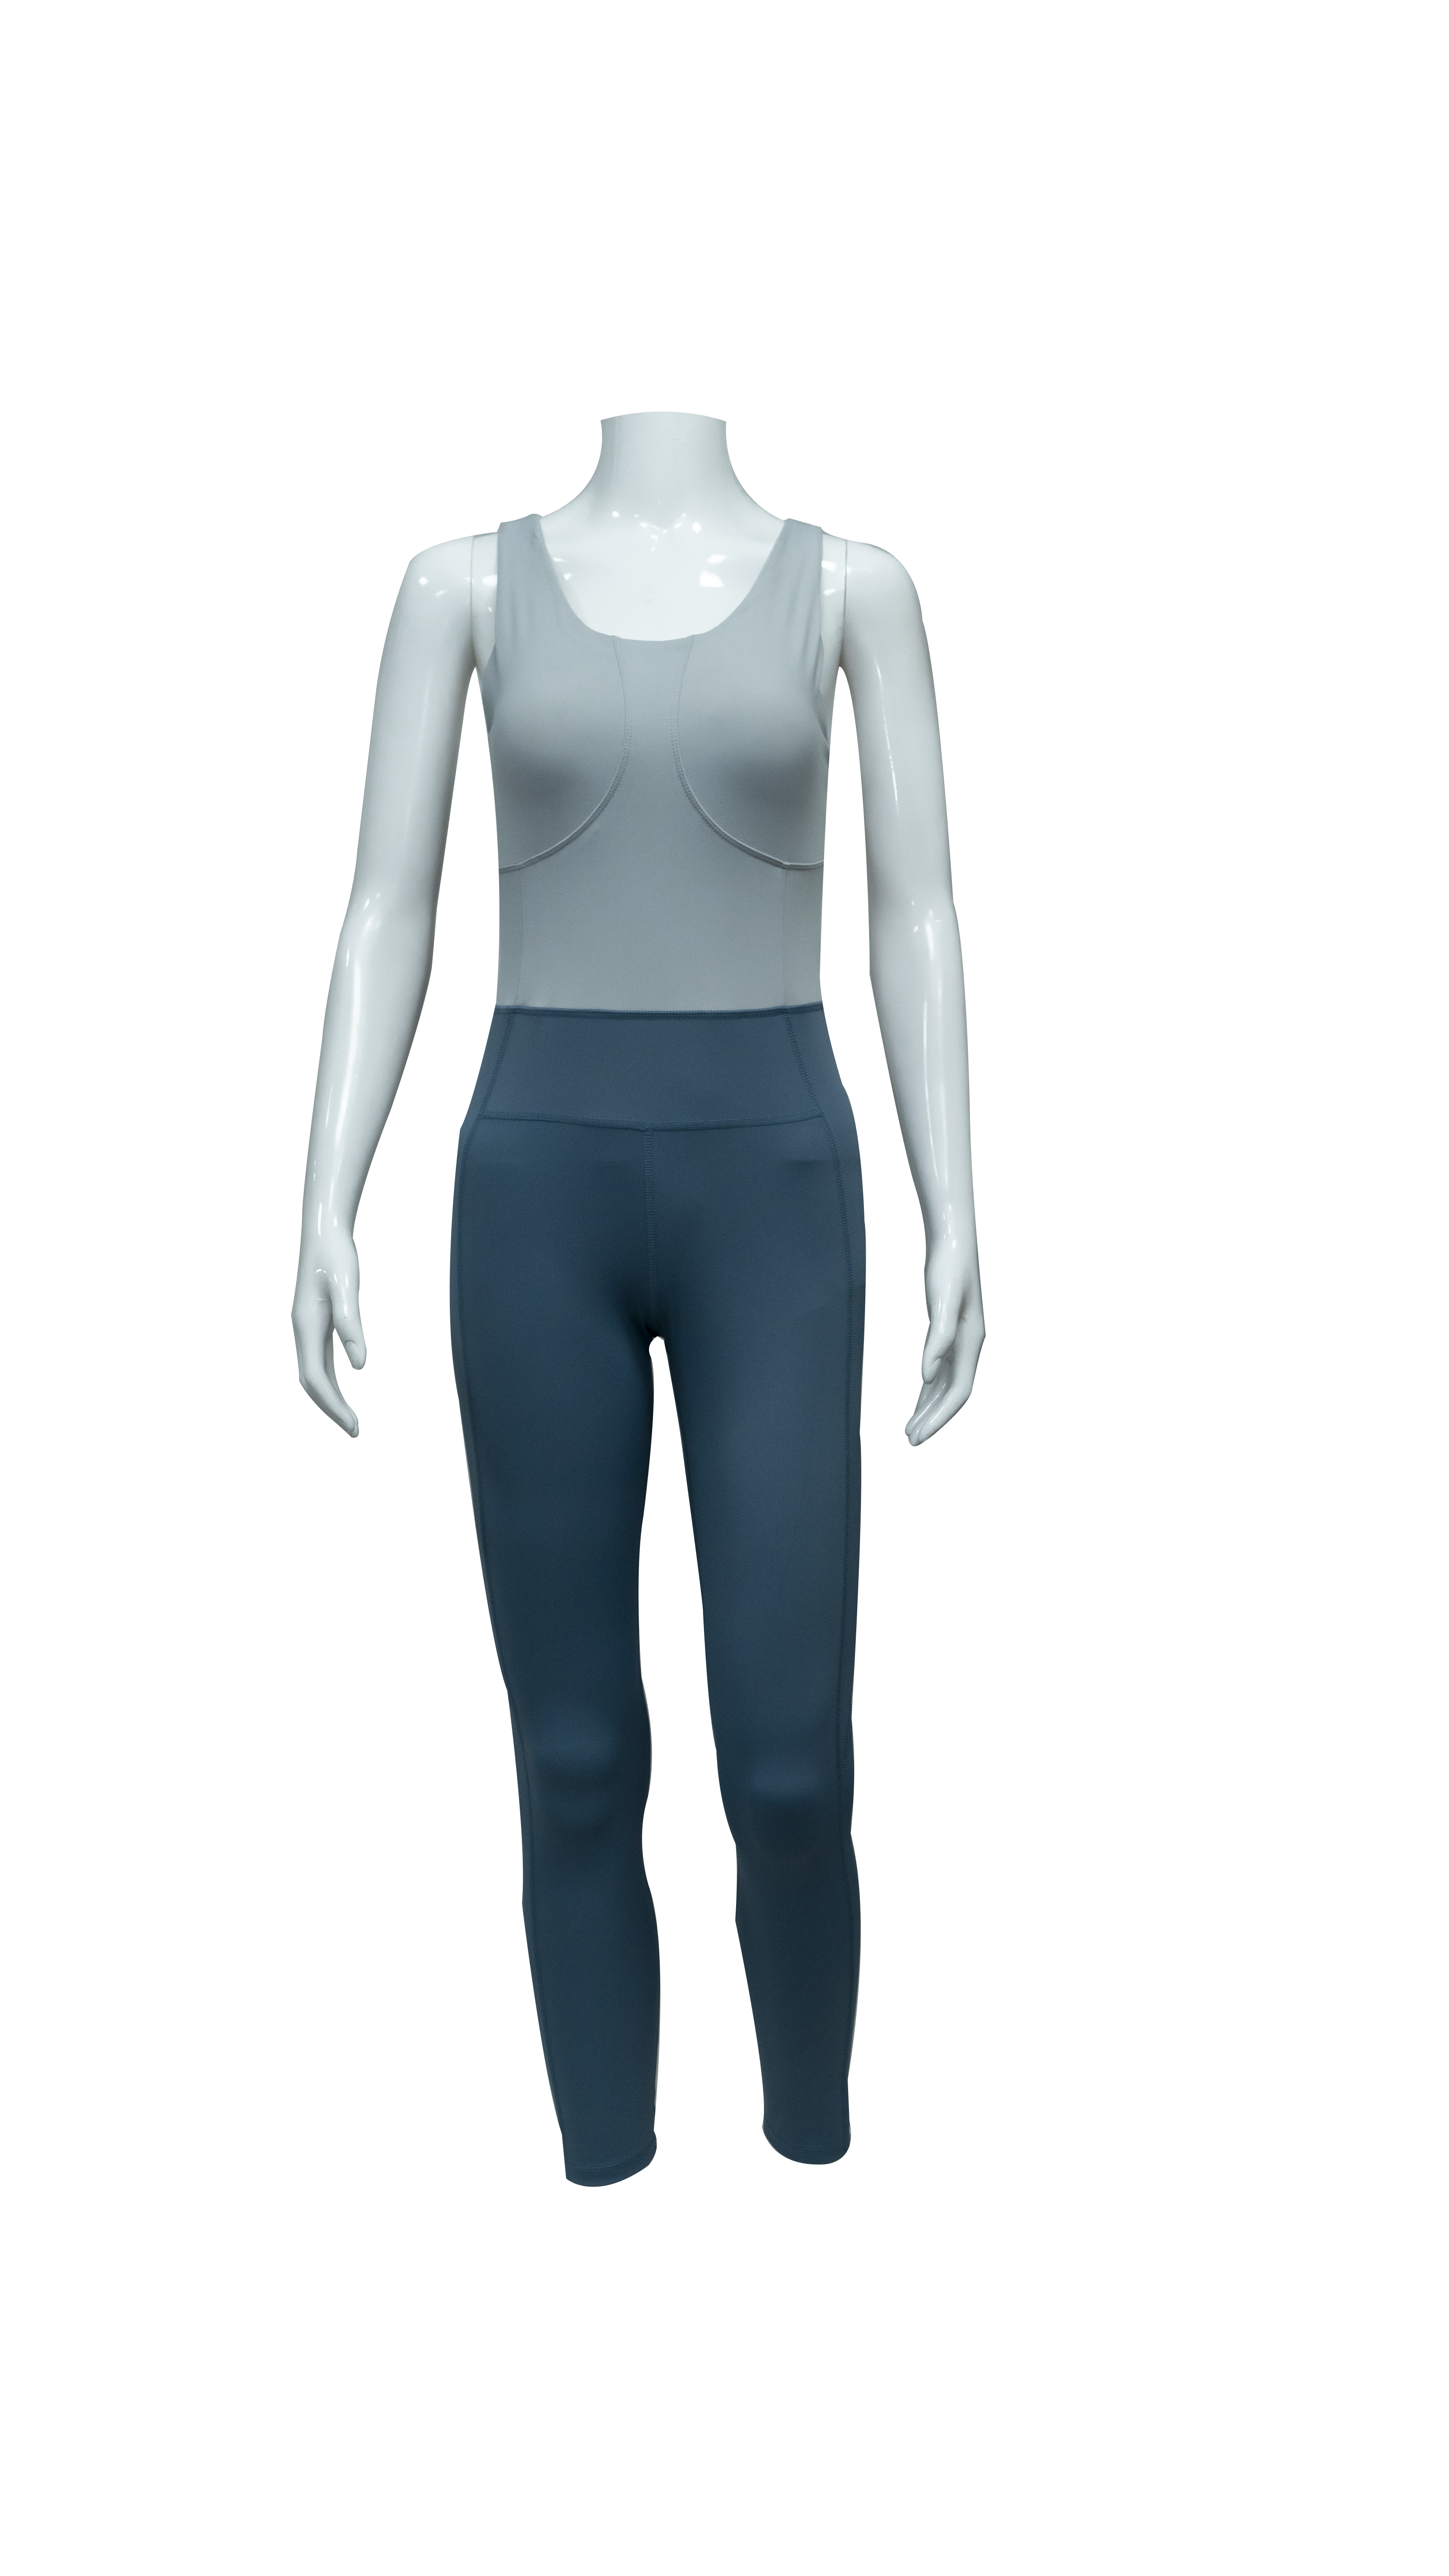 Exercise Outfit For Women – 7